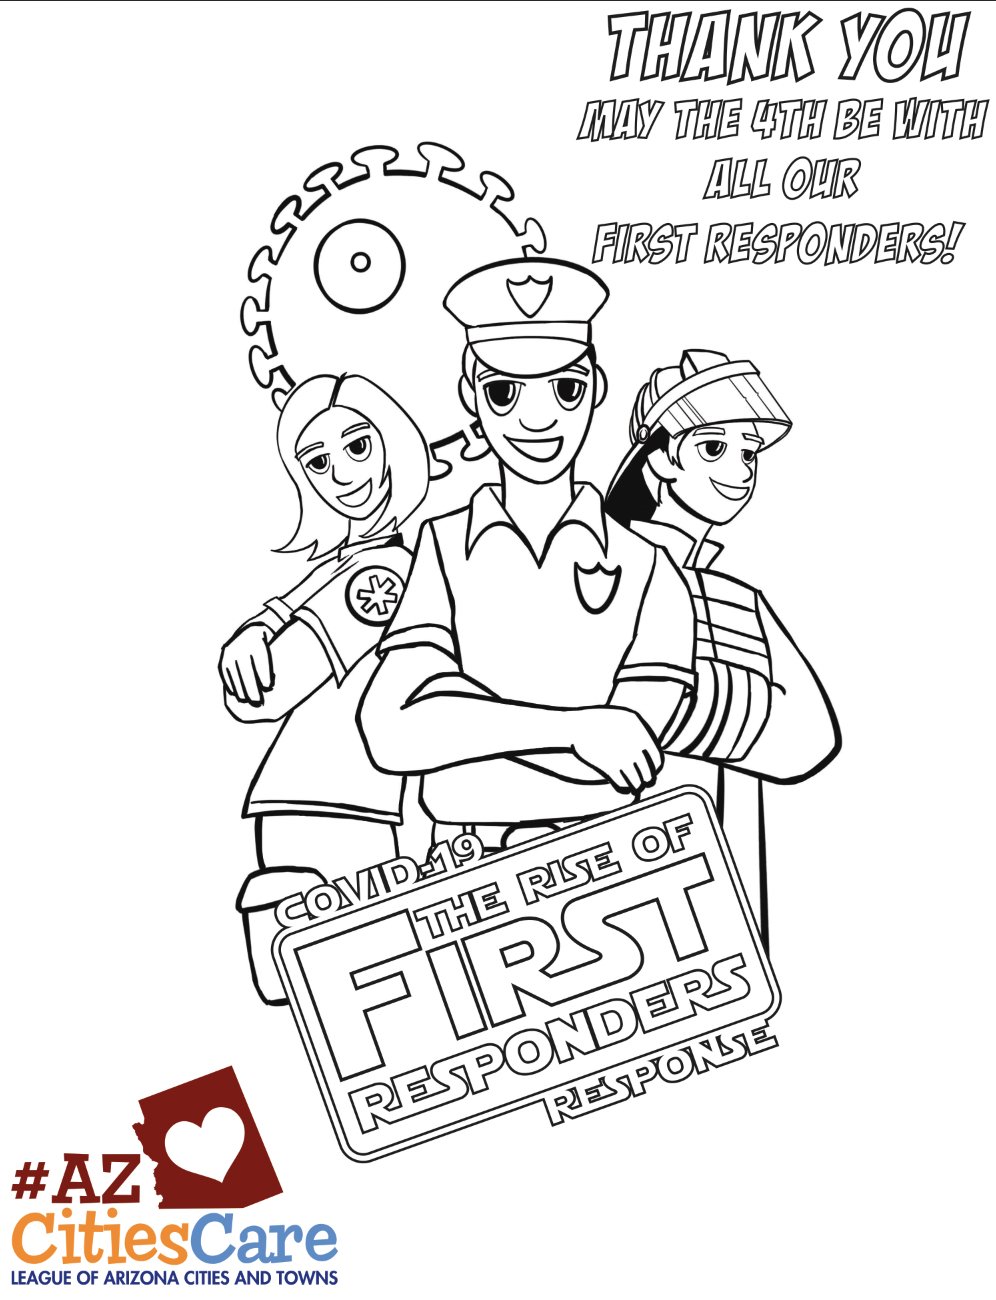 Arizona league on x were celebrating starwarsday with our new maythethbewithyou coloring sheet color our new page to brighten a firstresponders day âï tag ususe azcitiescare to have your masterpiece reposted more